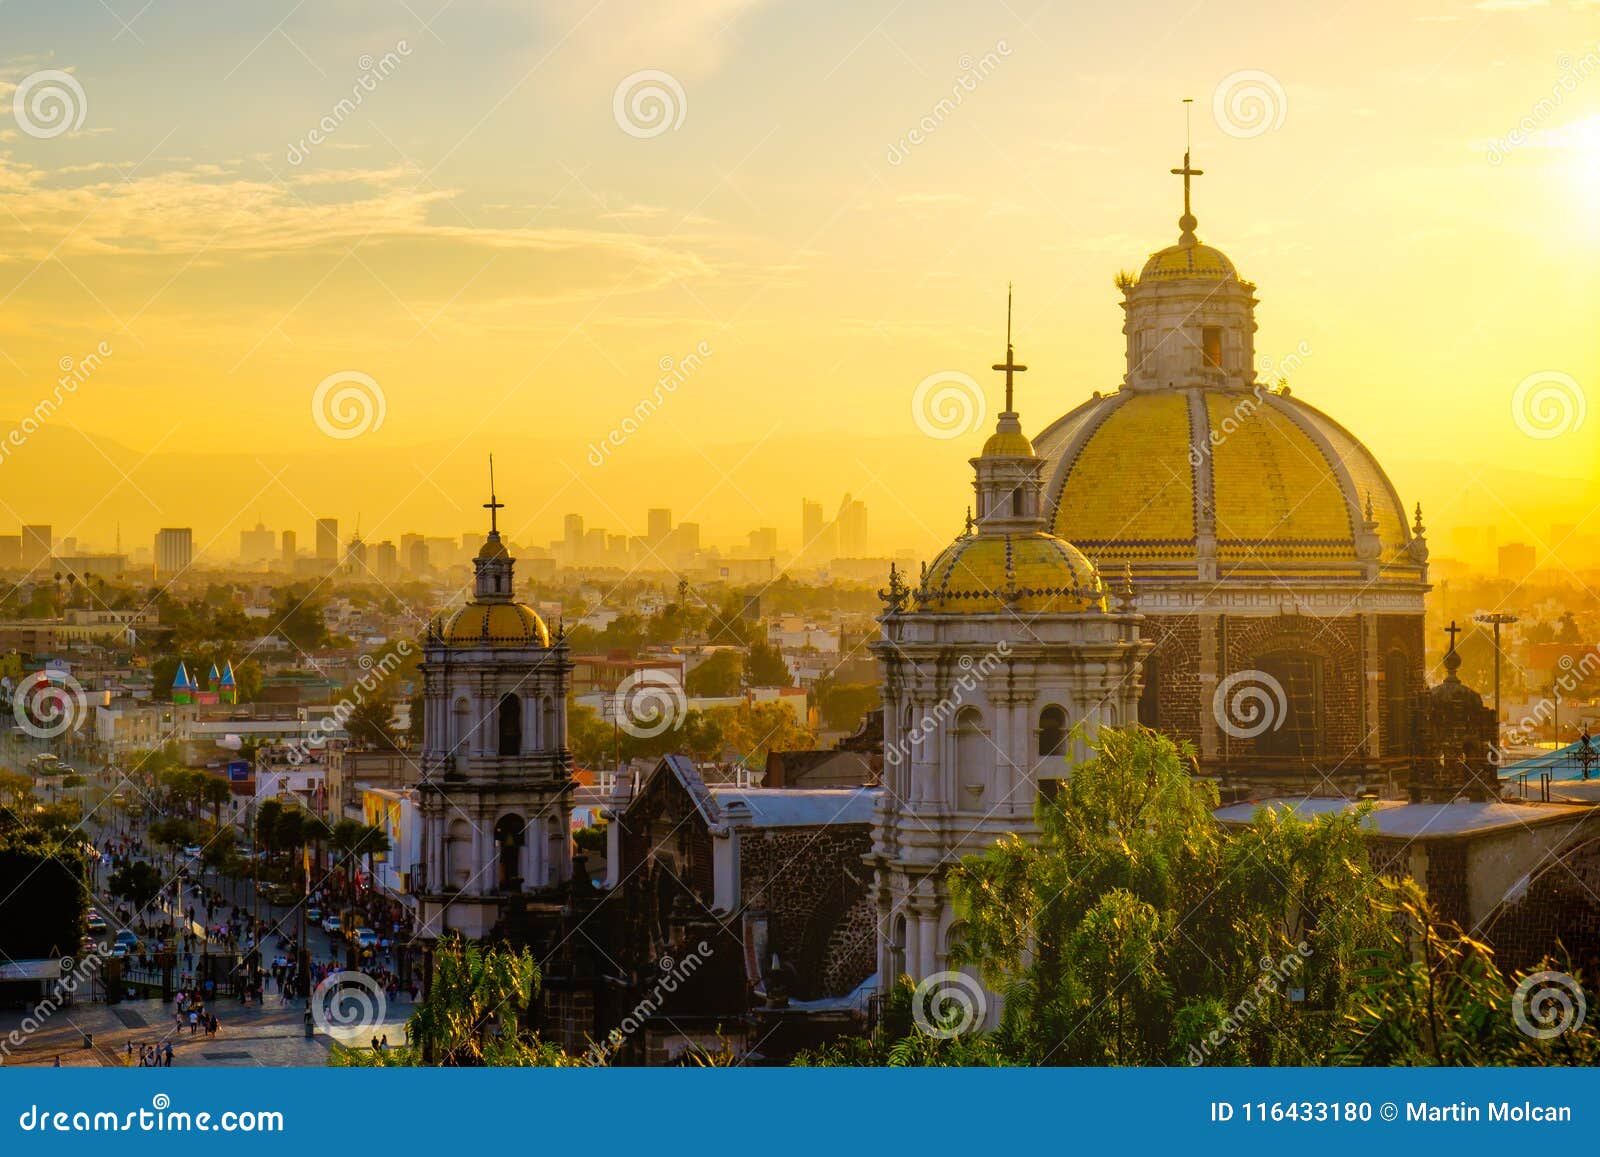 scenic view at basilica of guadalupe with mexico city skyline